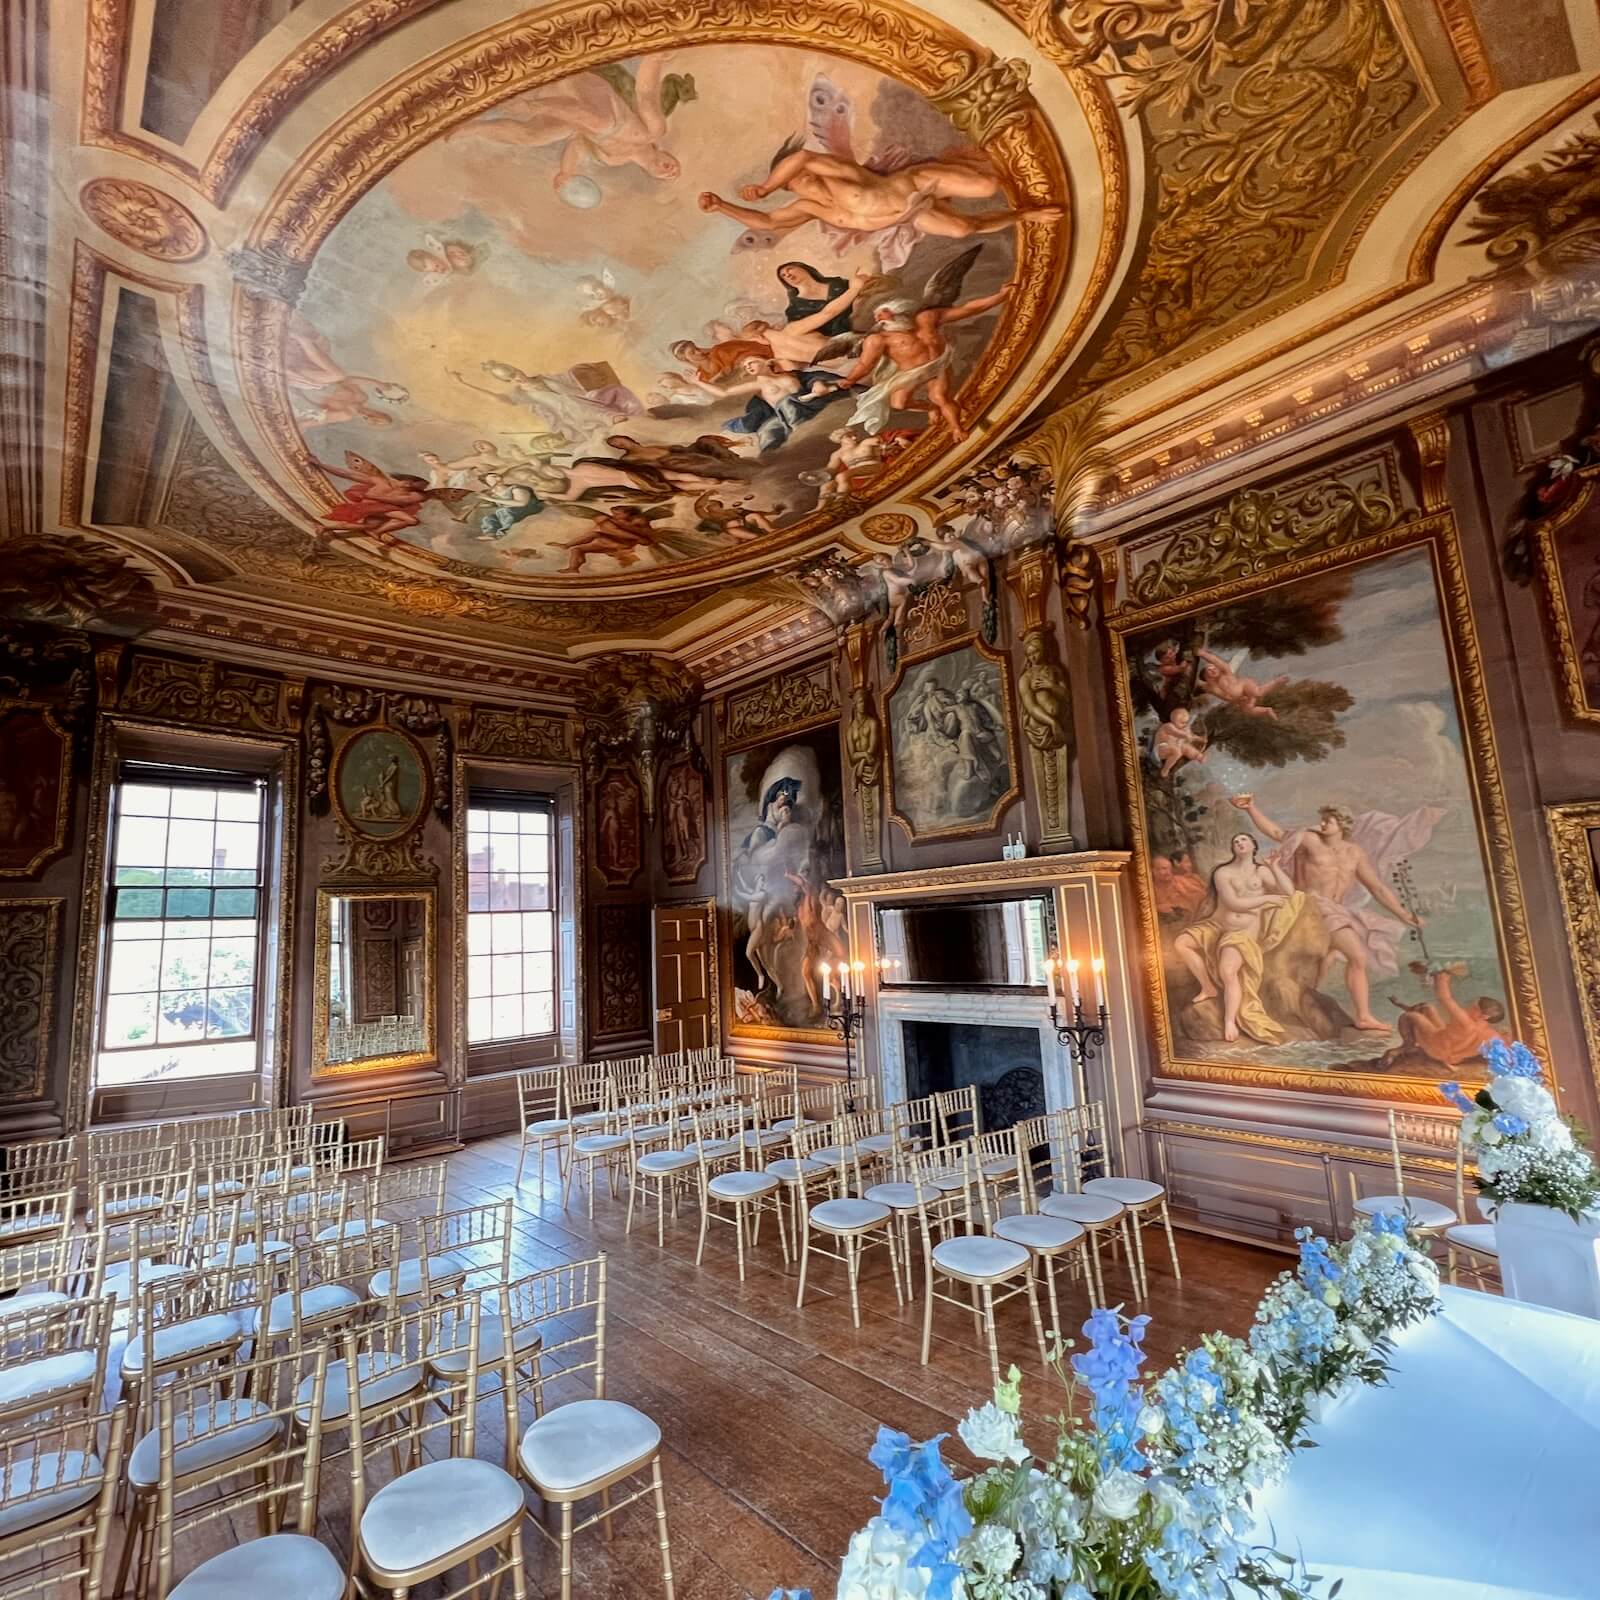 Little Banqueting House at Hampton Court